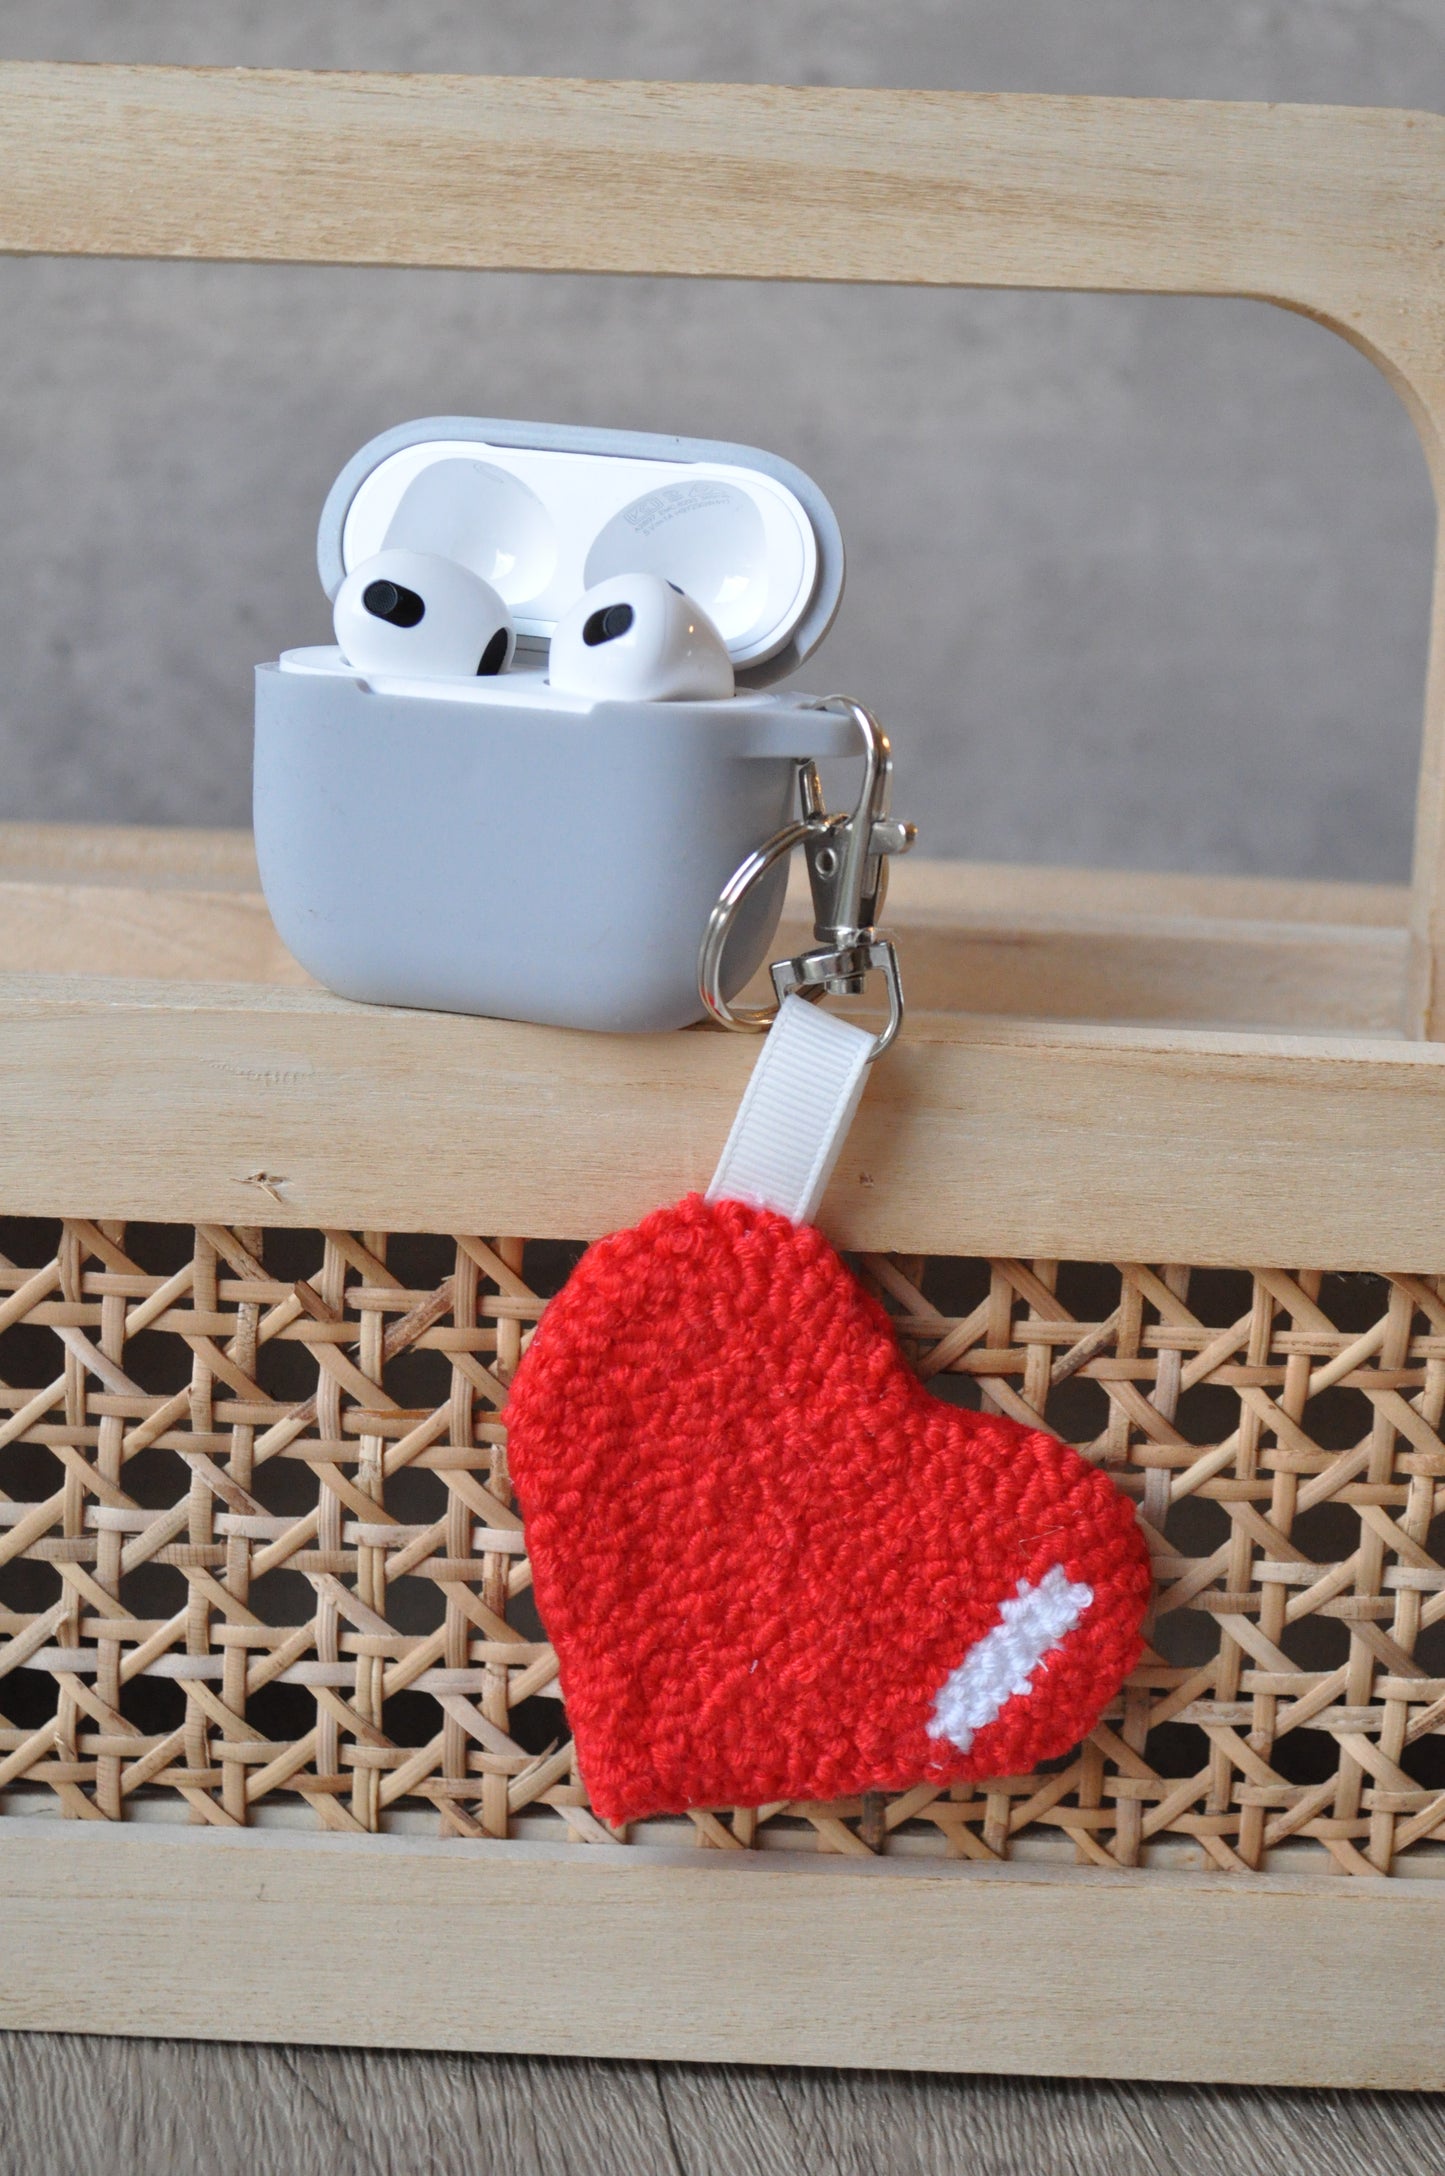 Punch Needle Heart Keychain | Airpods Charm